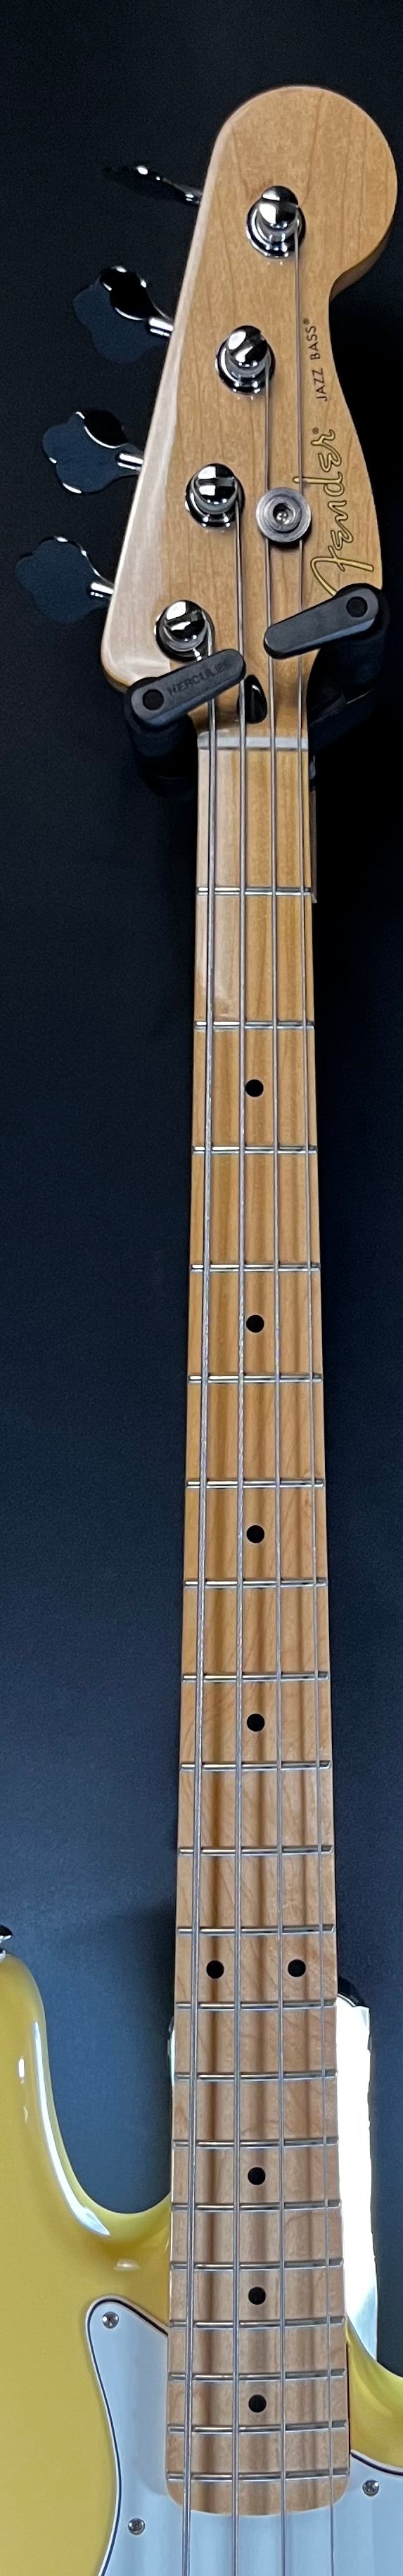 Neck of Used 2021 Fender Jazz Bass Buttercream TFW262